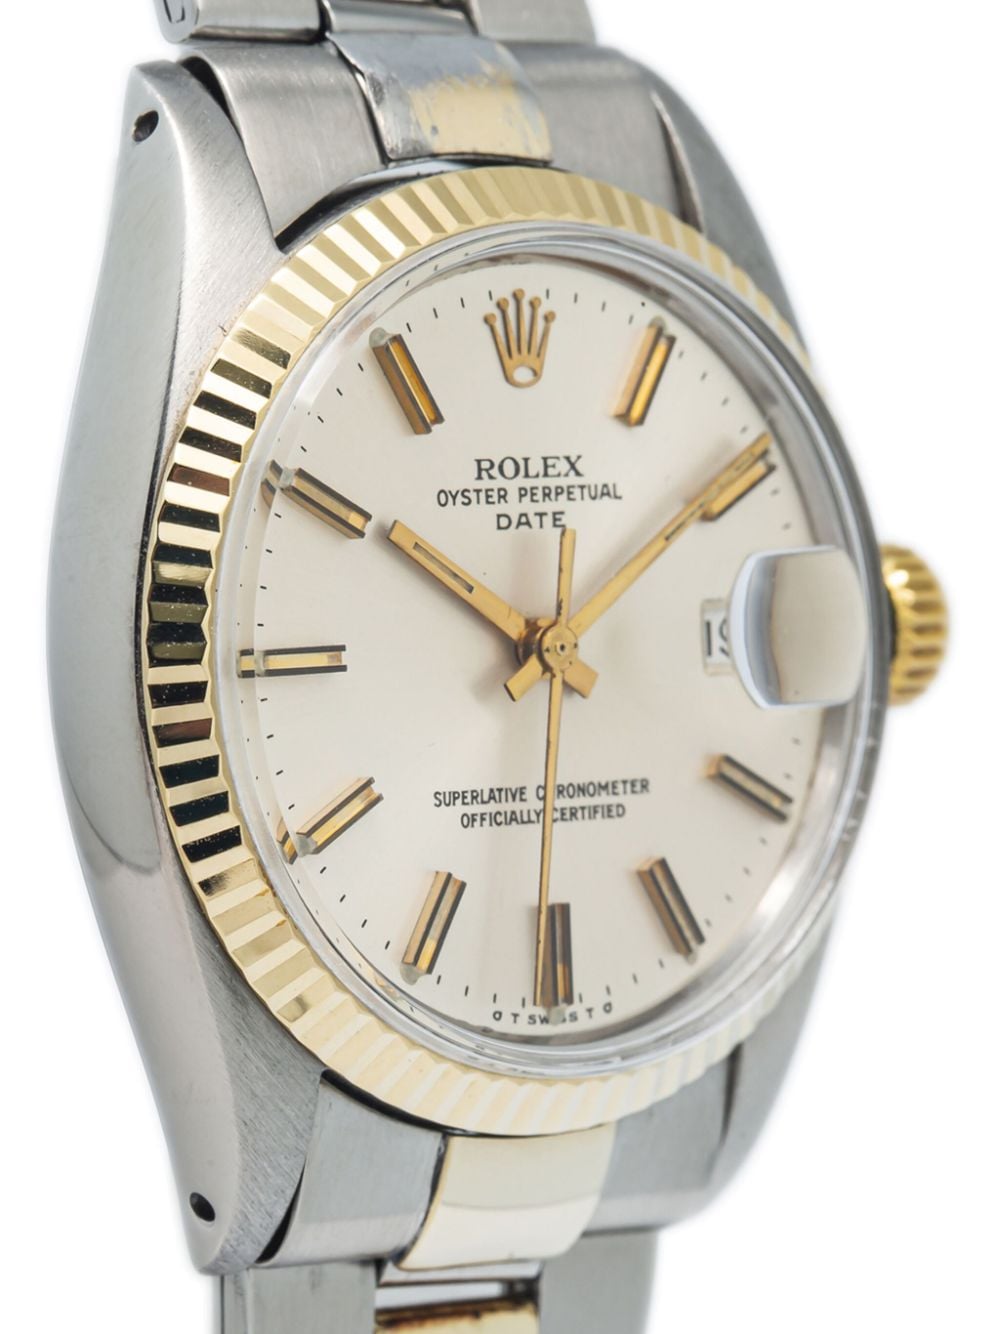 Pre-owned Rolex Oyster Perpetual Date 34毫米腕表（典藏款） In Gold